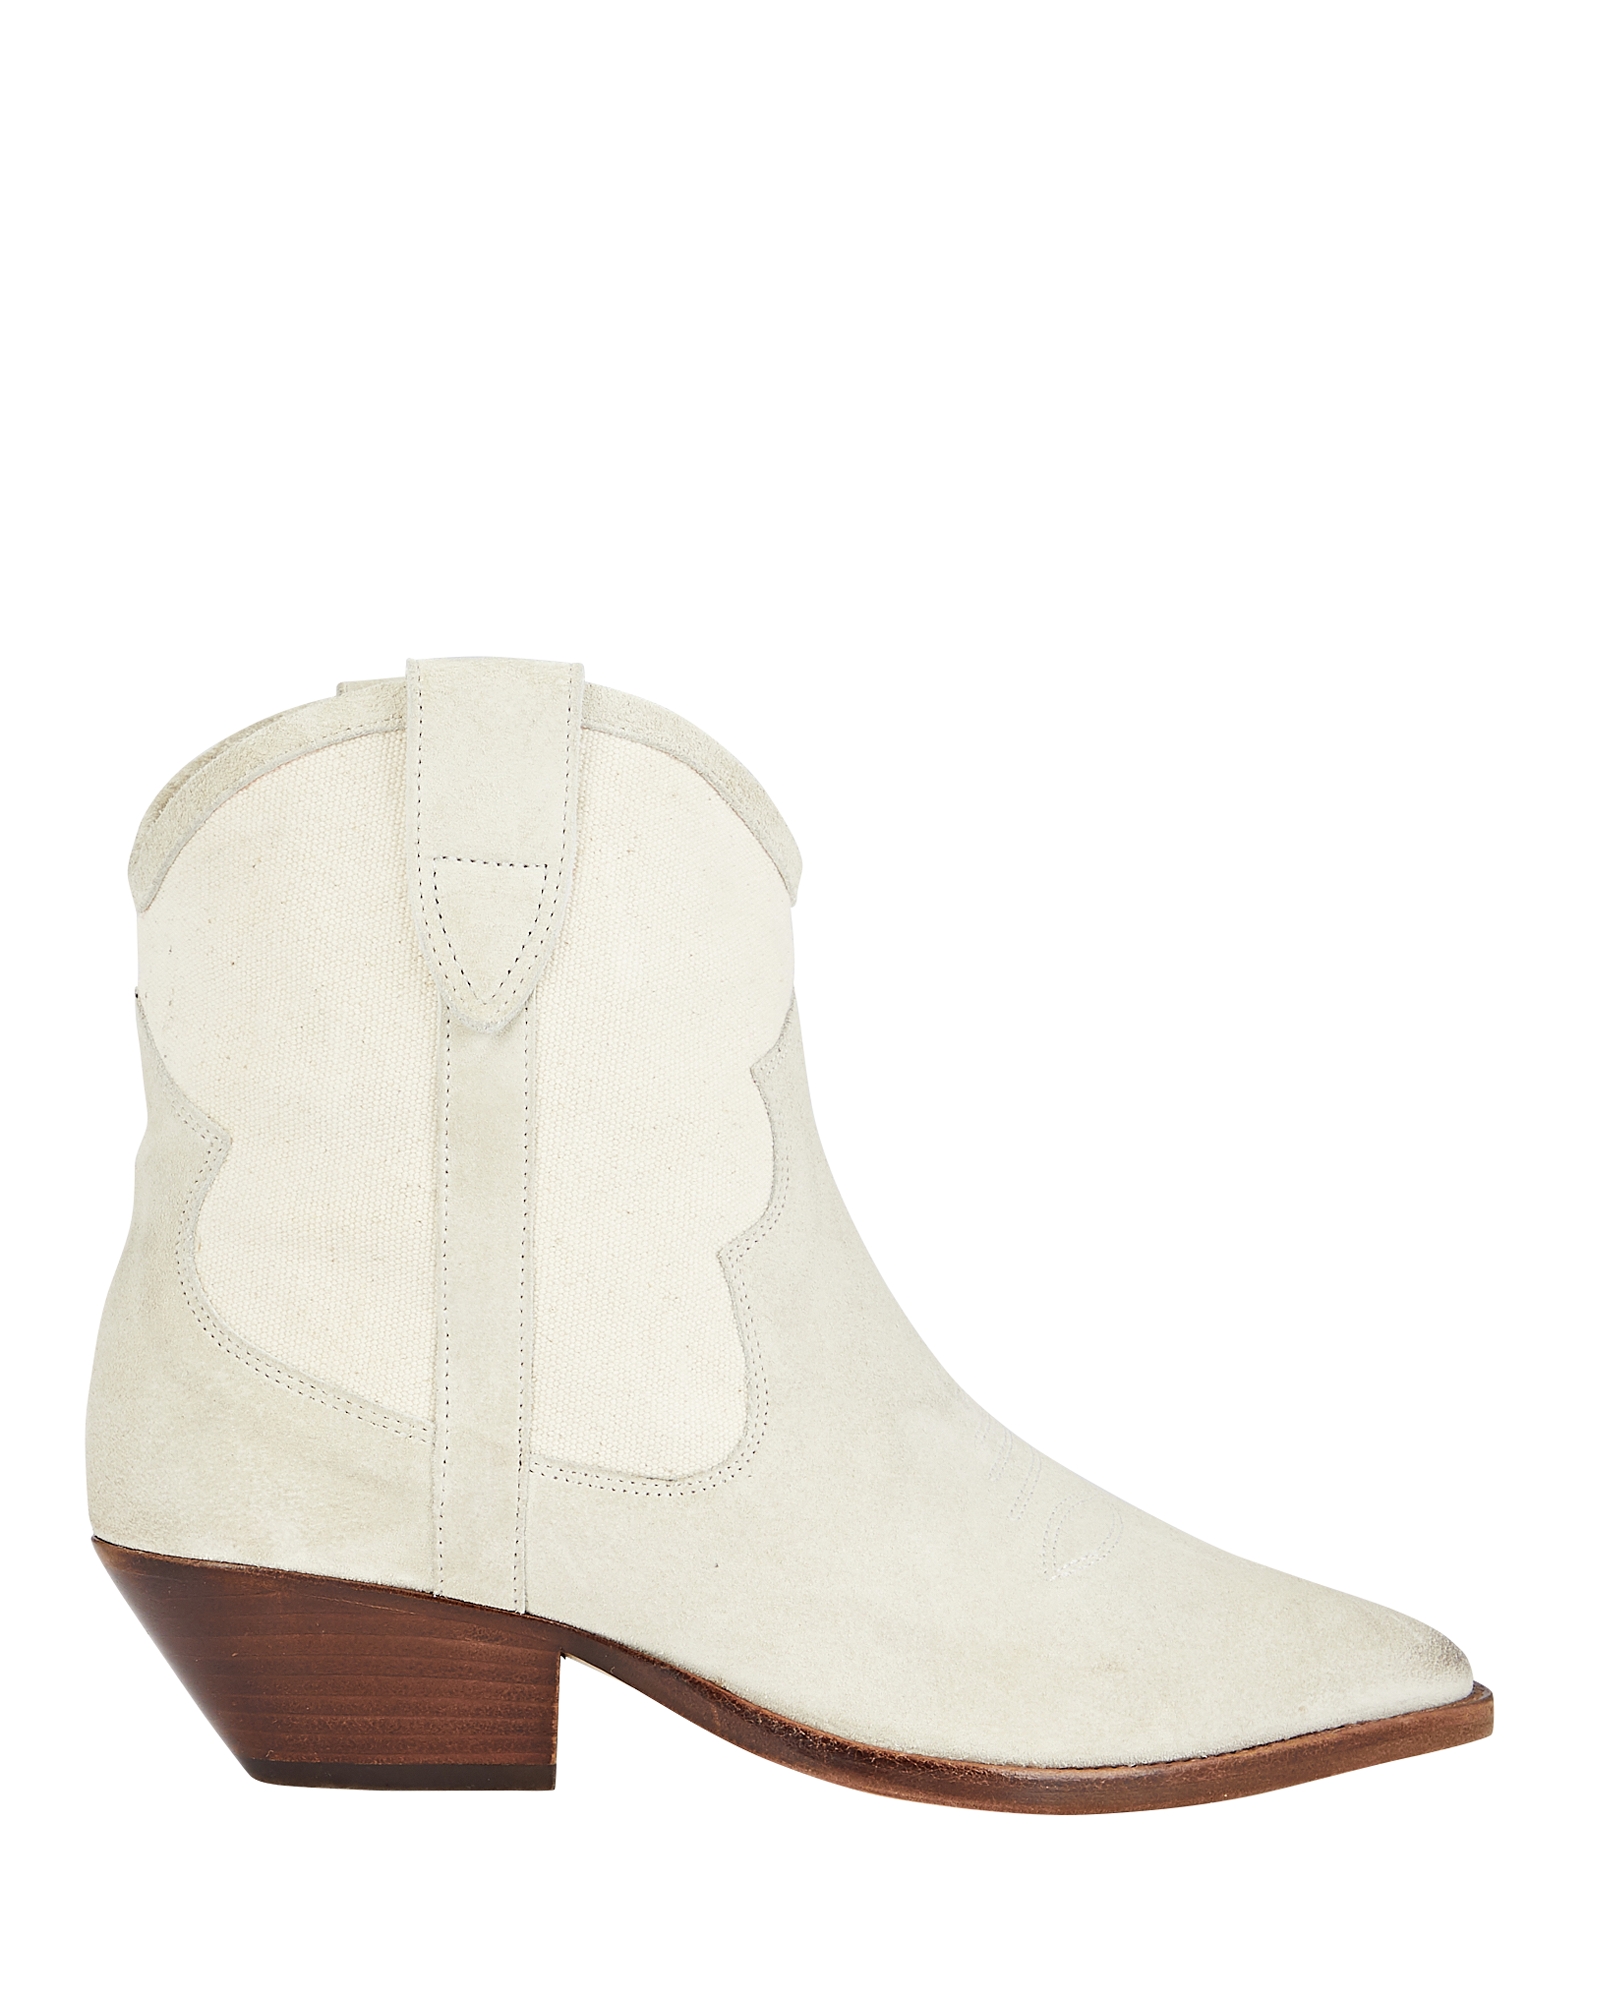 Isabel Marant Demar Western Ankle Booties | INTERMIX®